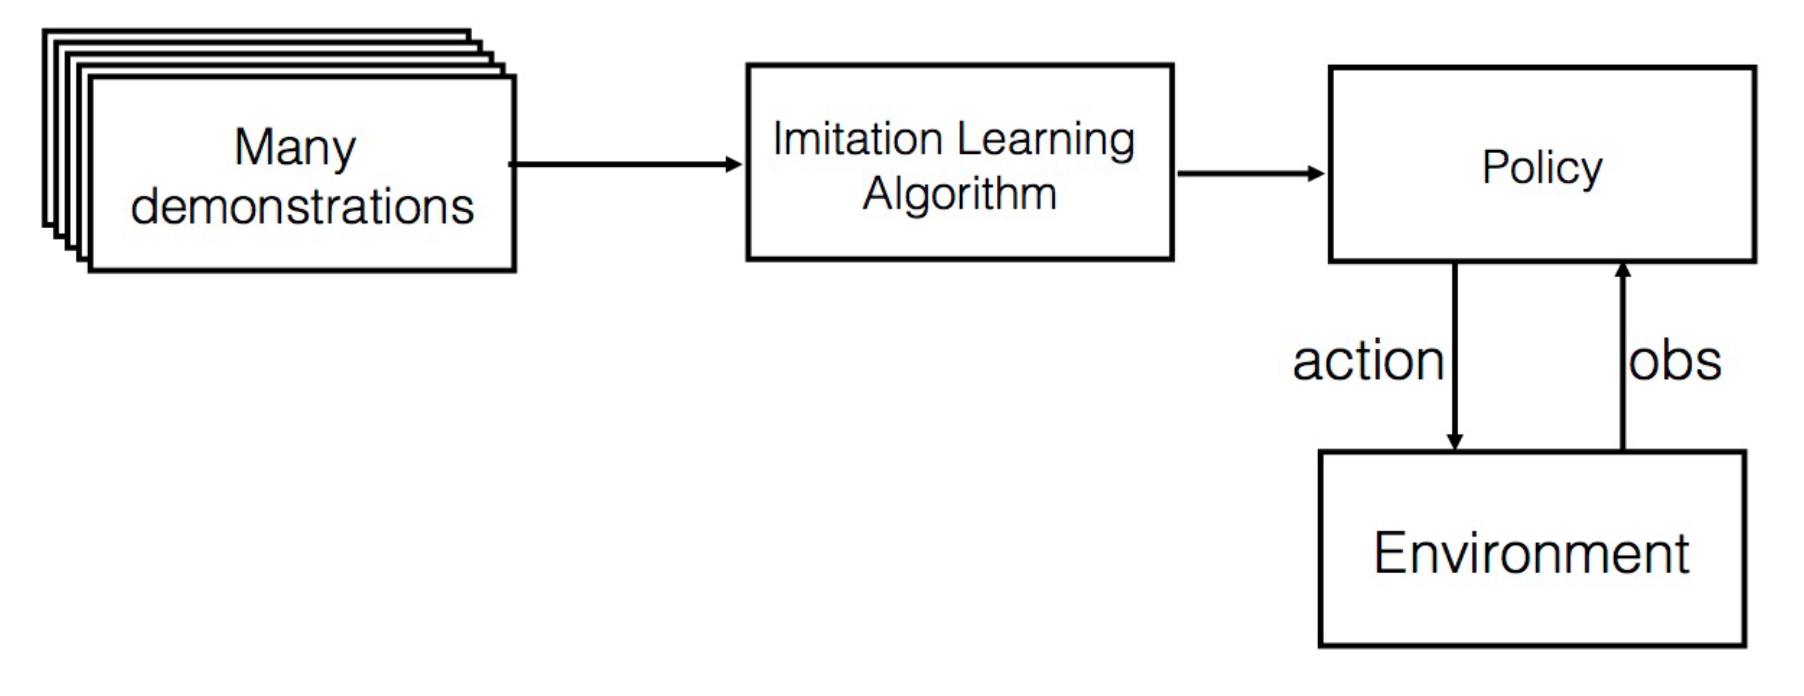 research areas in deep learning